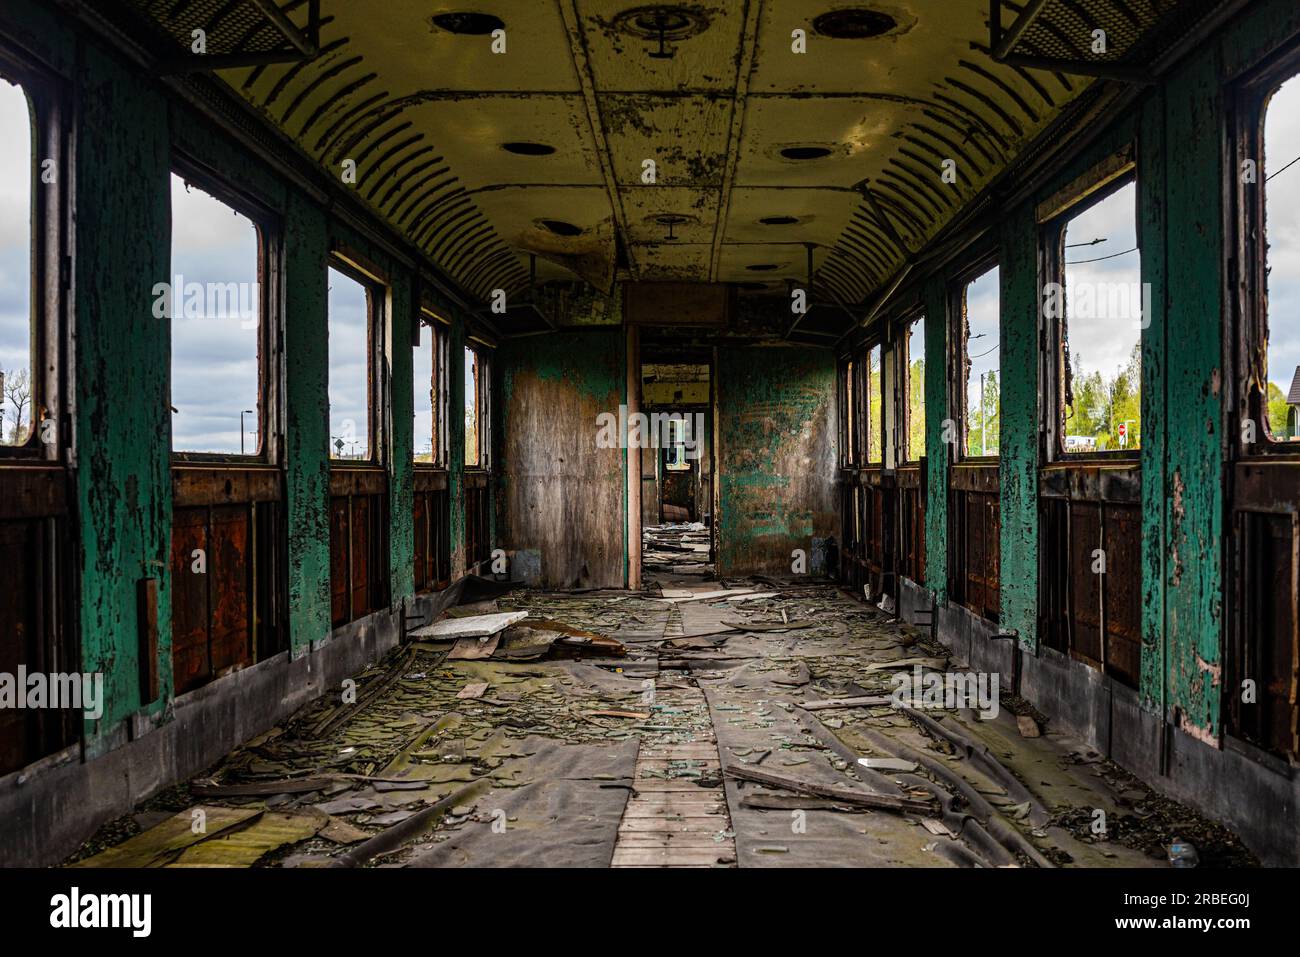 Interior of old messy passenger carriage with windows during daylight Stock Photo